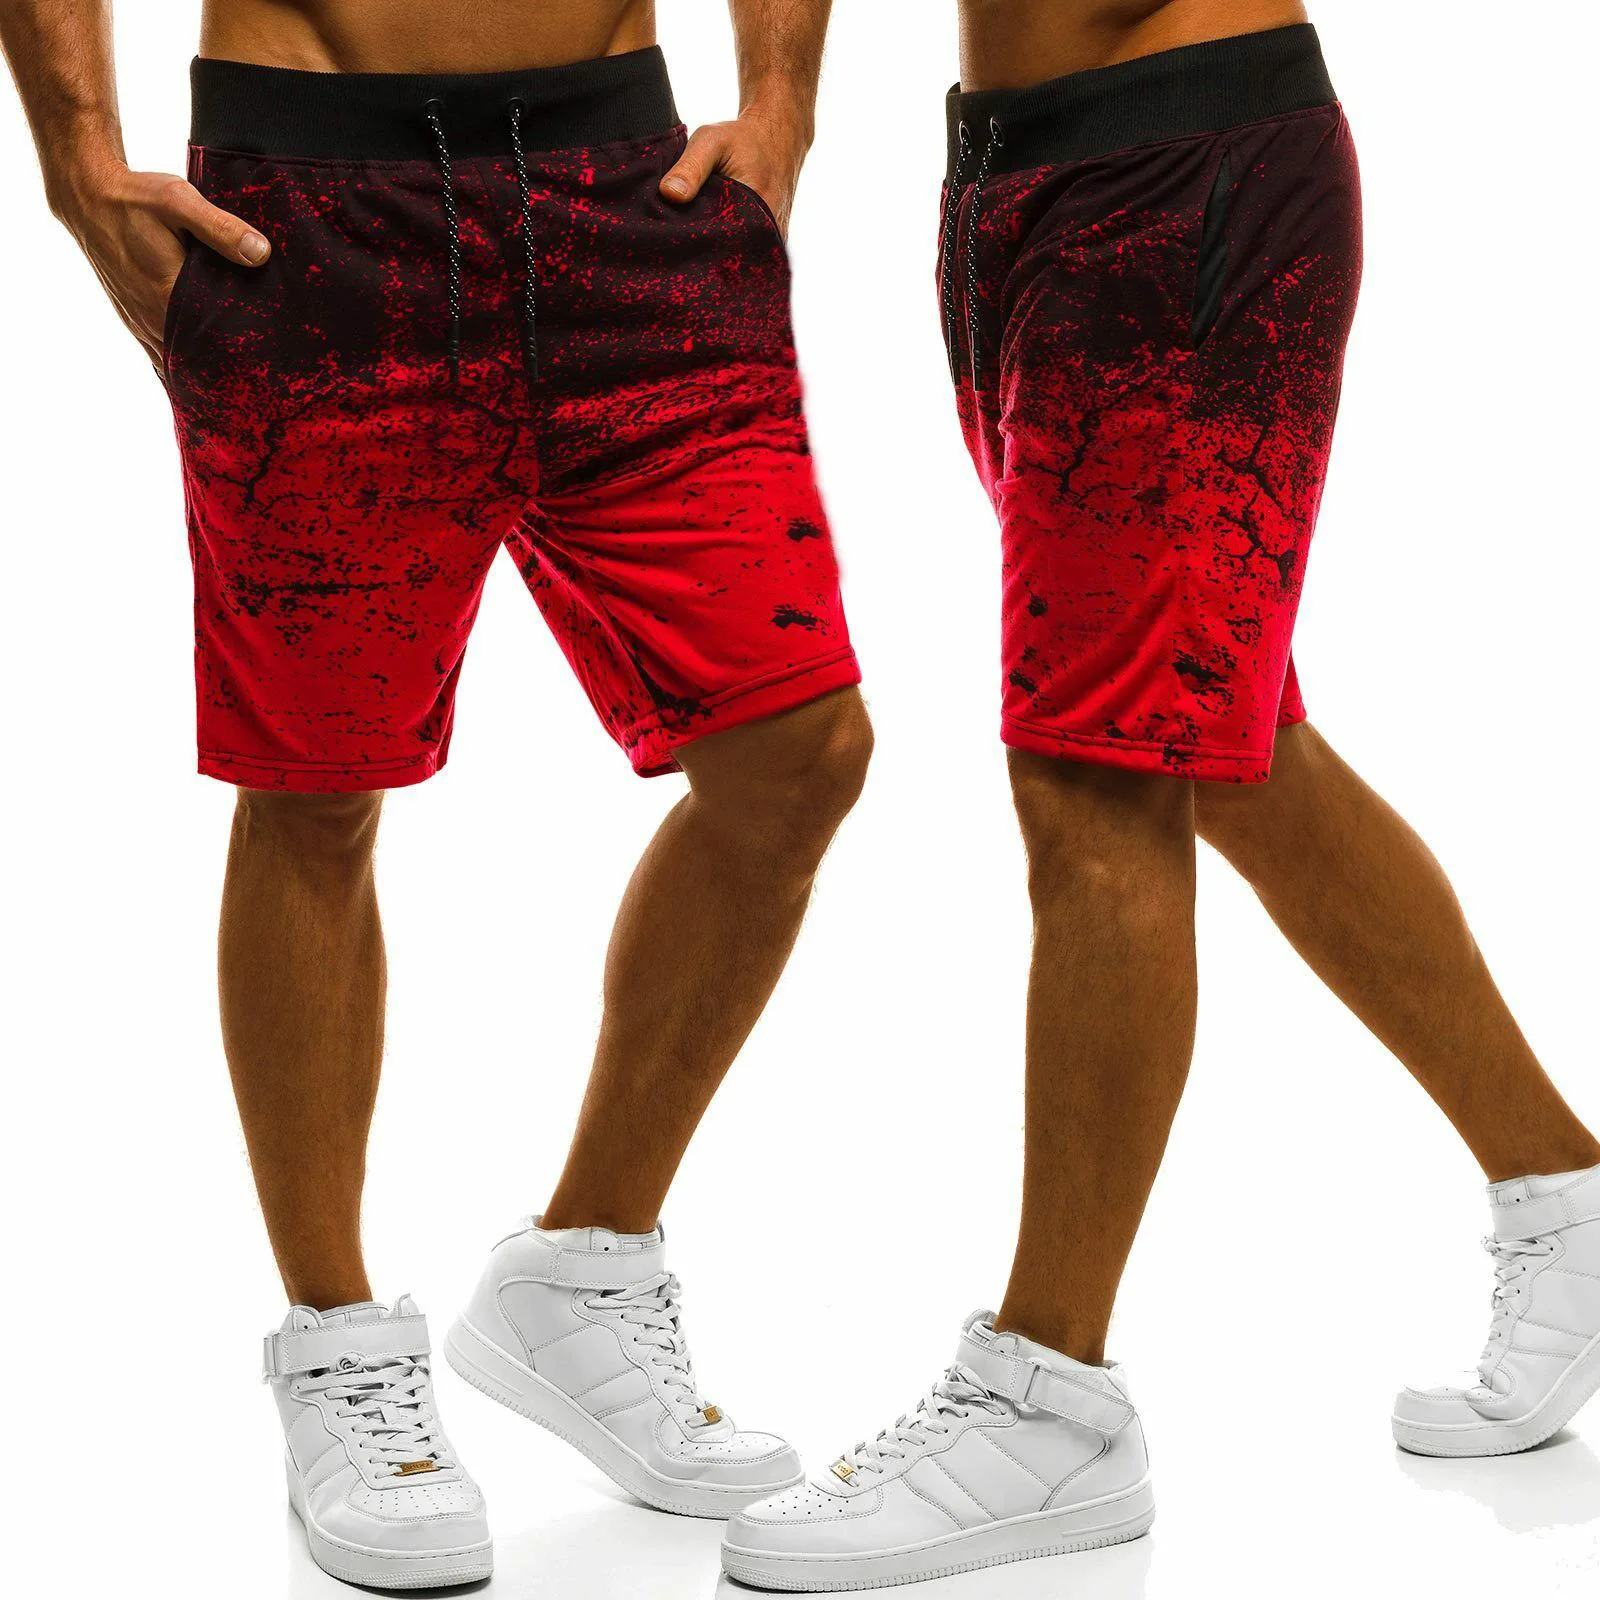 Shorts Men's Sweatpants Casual Color Blocking Summer High Street Basketball Outdoor Running Loose Five Point Pants